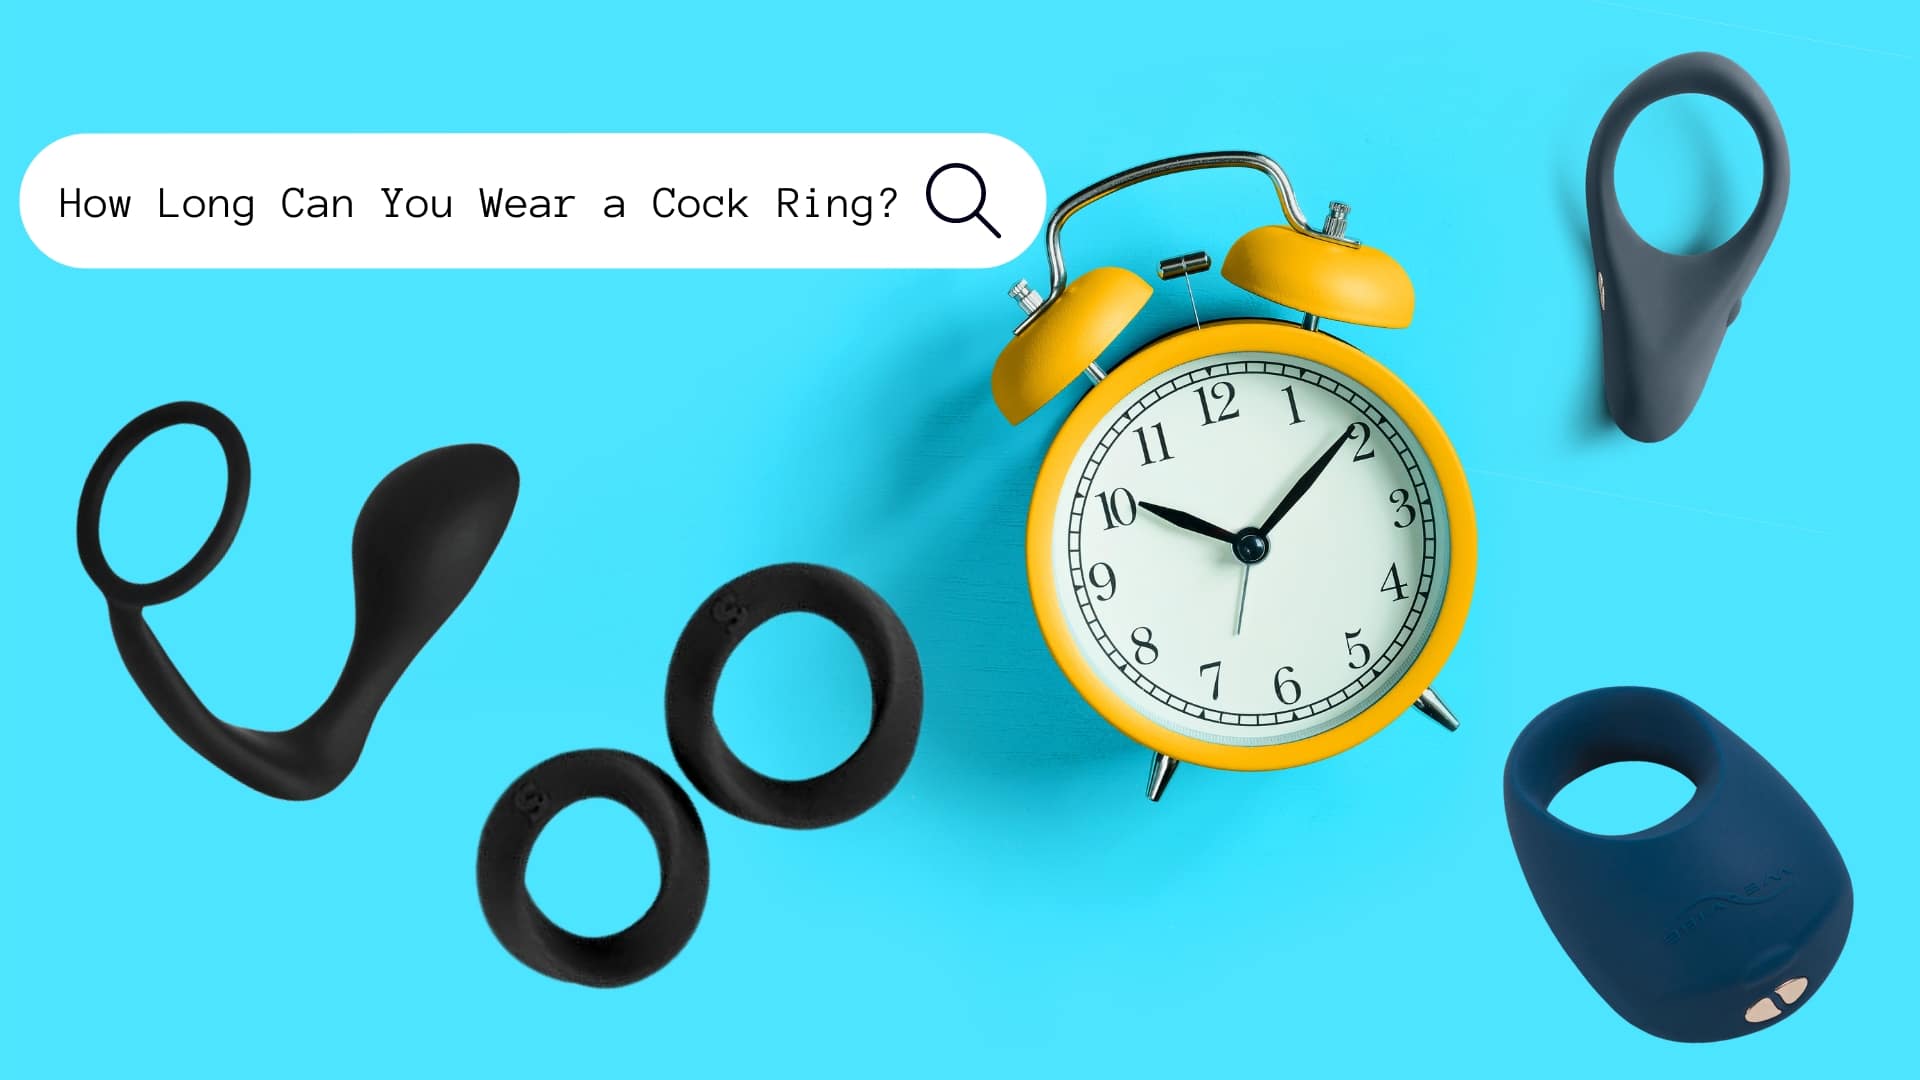 How Long Can You Wear a Cock Ring?